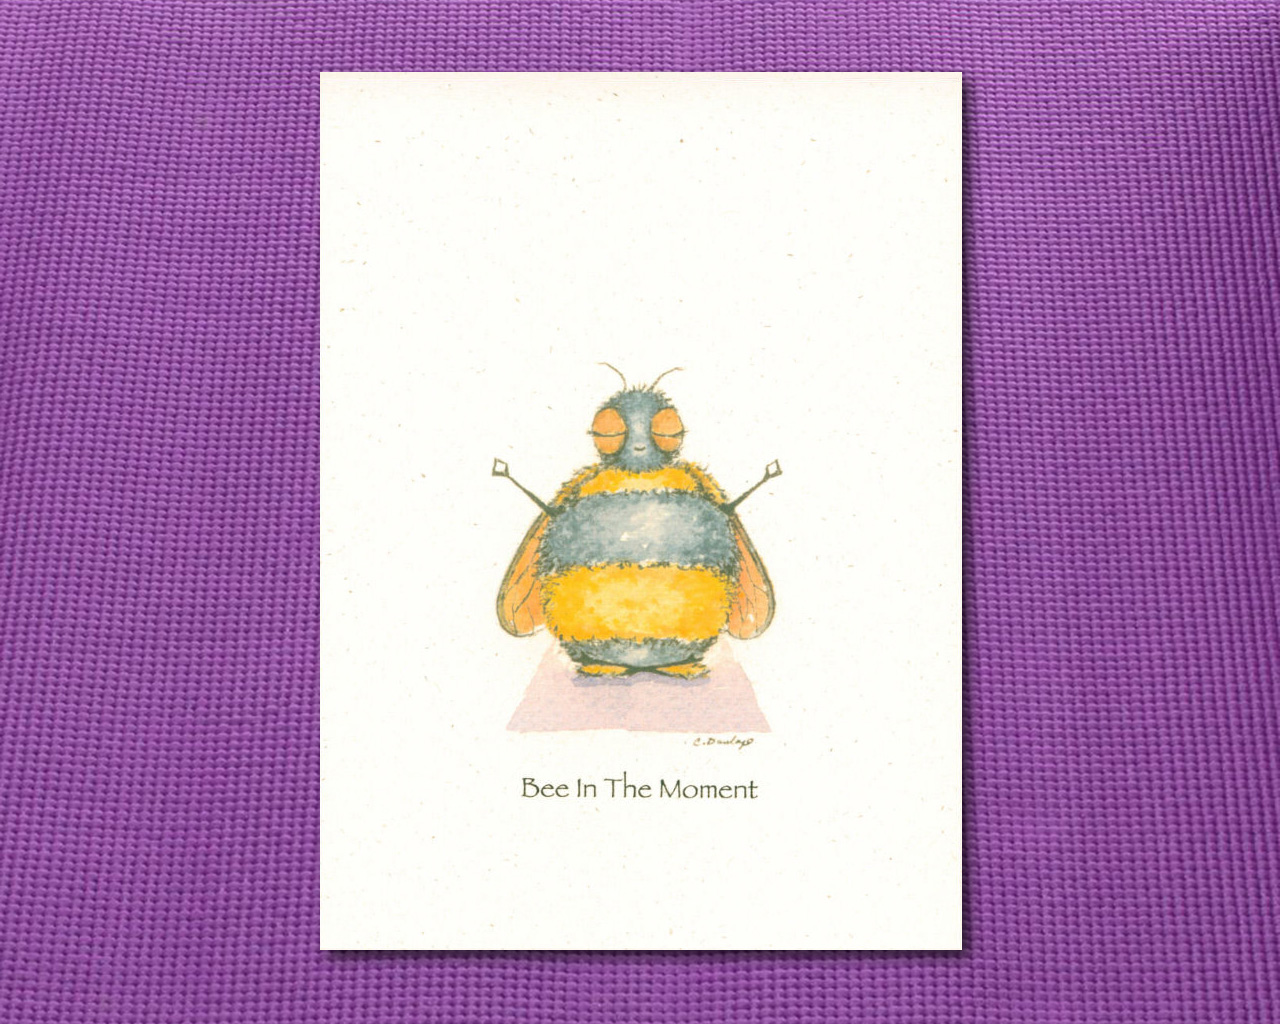 printable note cards Bee Well Soon Gift Tag Set Bee back soon Bee calm carry on Just Bee cause don't worry Bee happy